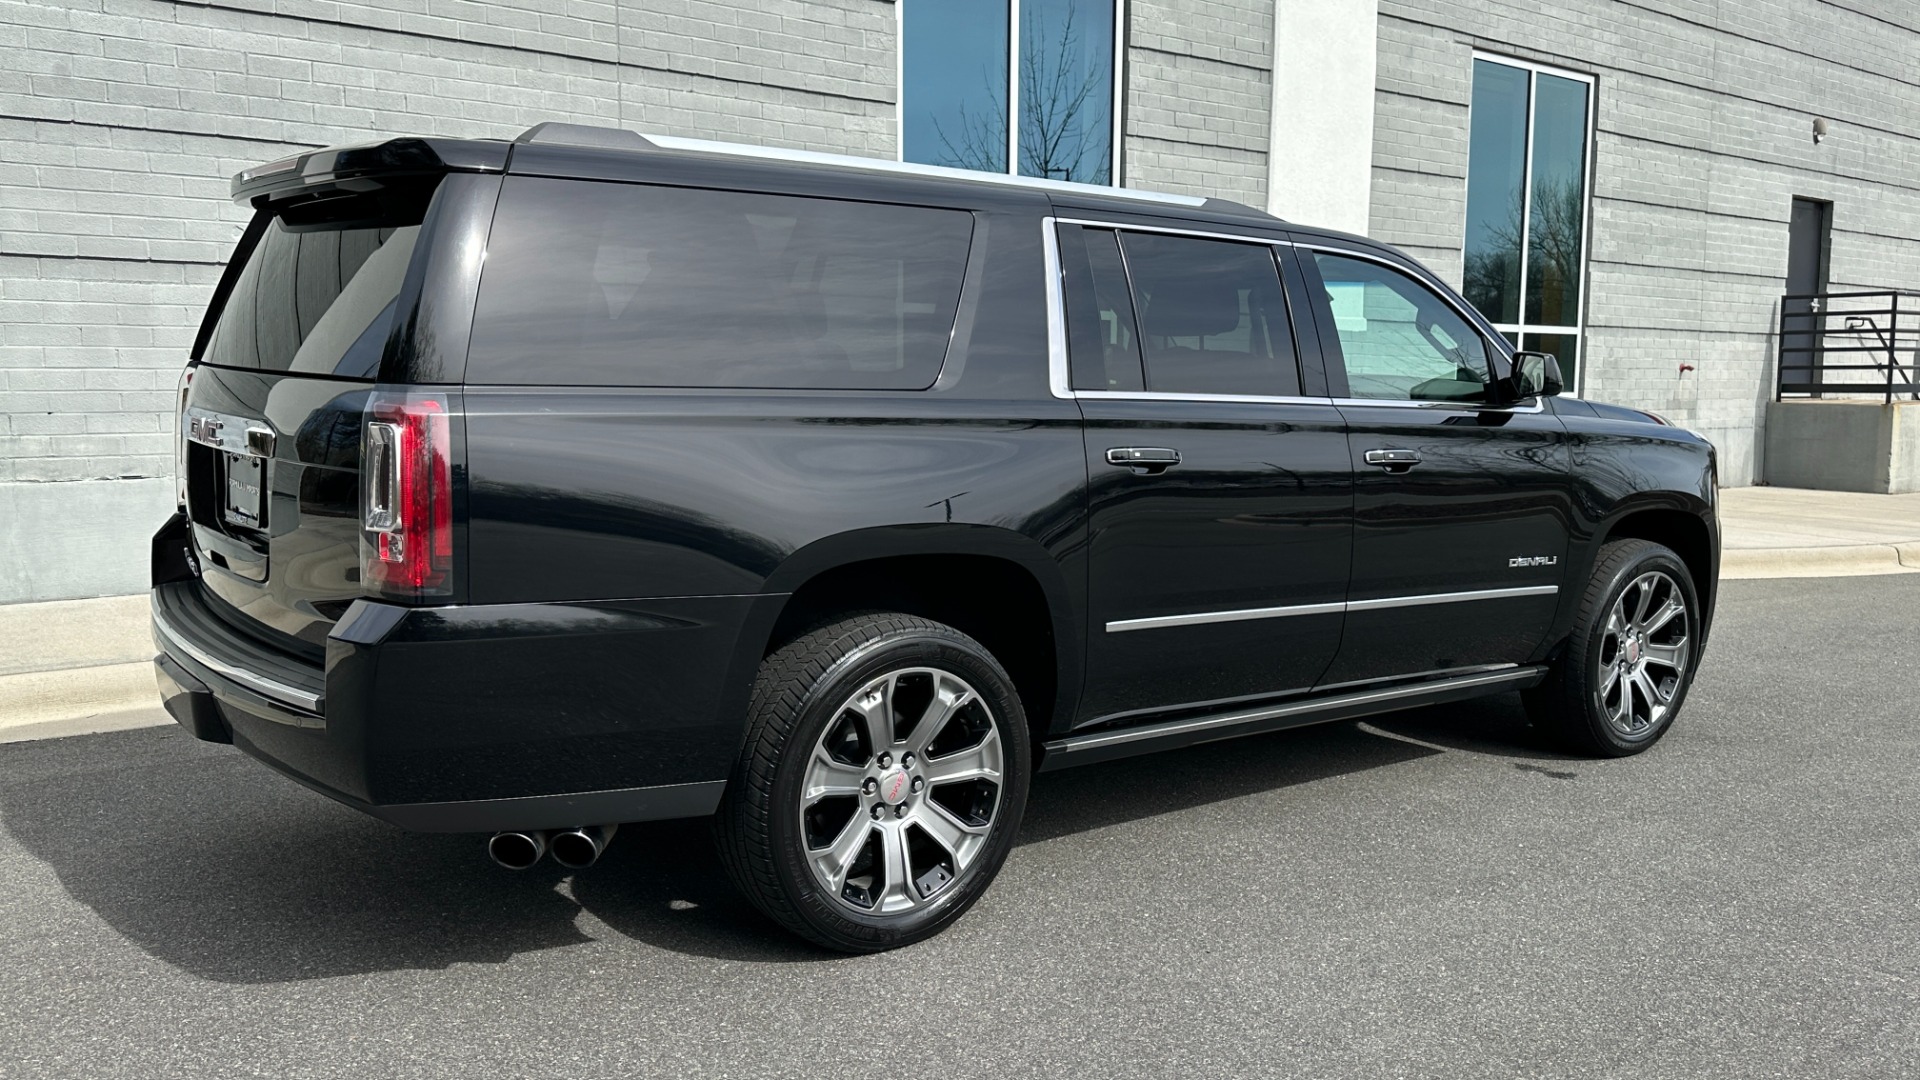 Used 2017 GMC Yukon XL DENALI / OPEN ROAD PACKAGE / 22IN WHEELS / REAR ENTERTAINMENT for sale Sold at Formula Imports in Charlotte NC 28227 7